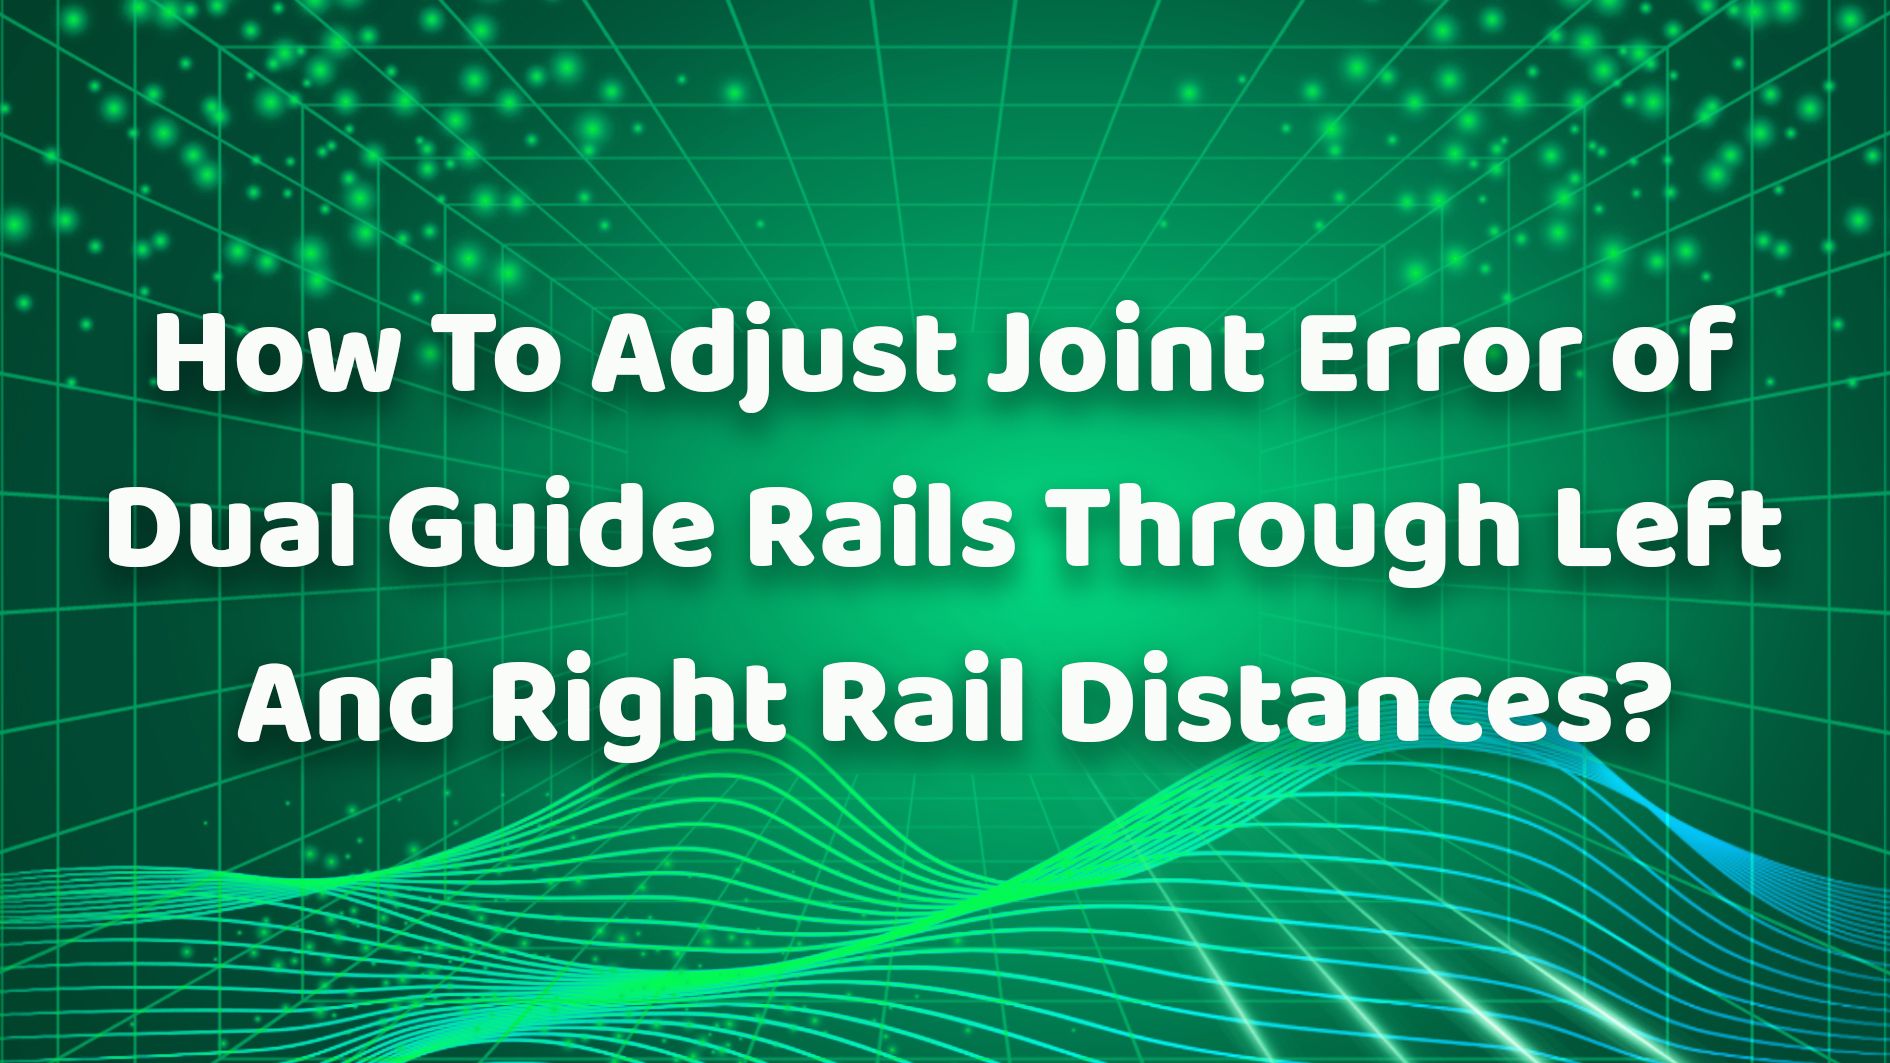 How To Adjust Joint Error of Dual Guide Rails Through Left And Right Rail Distances